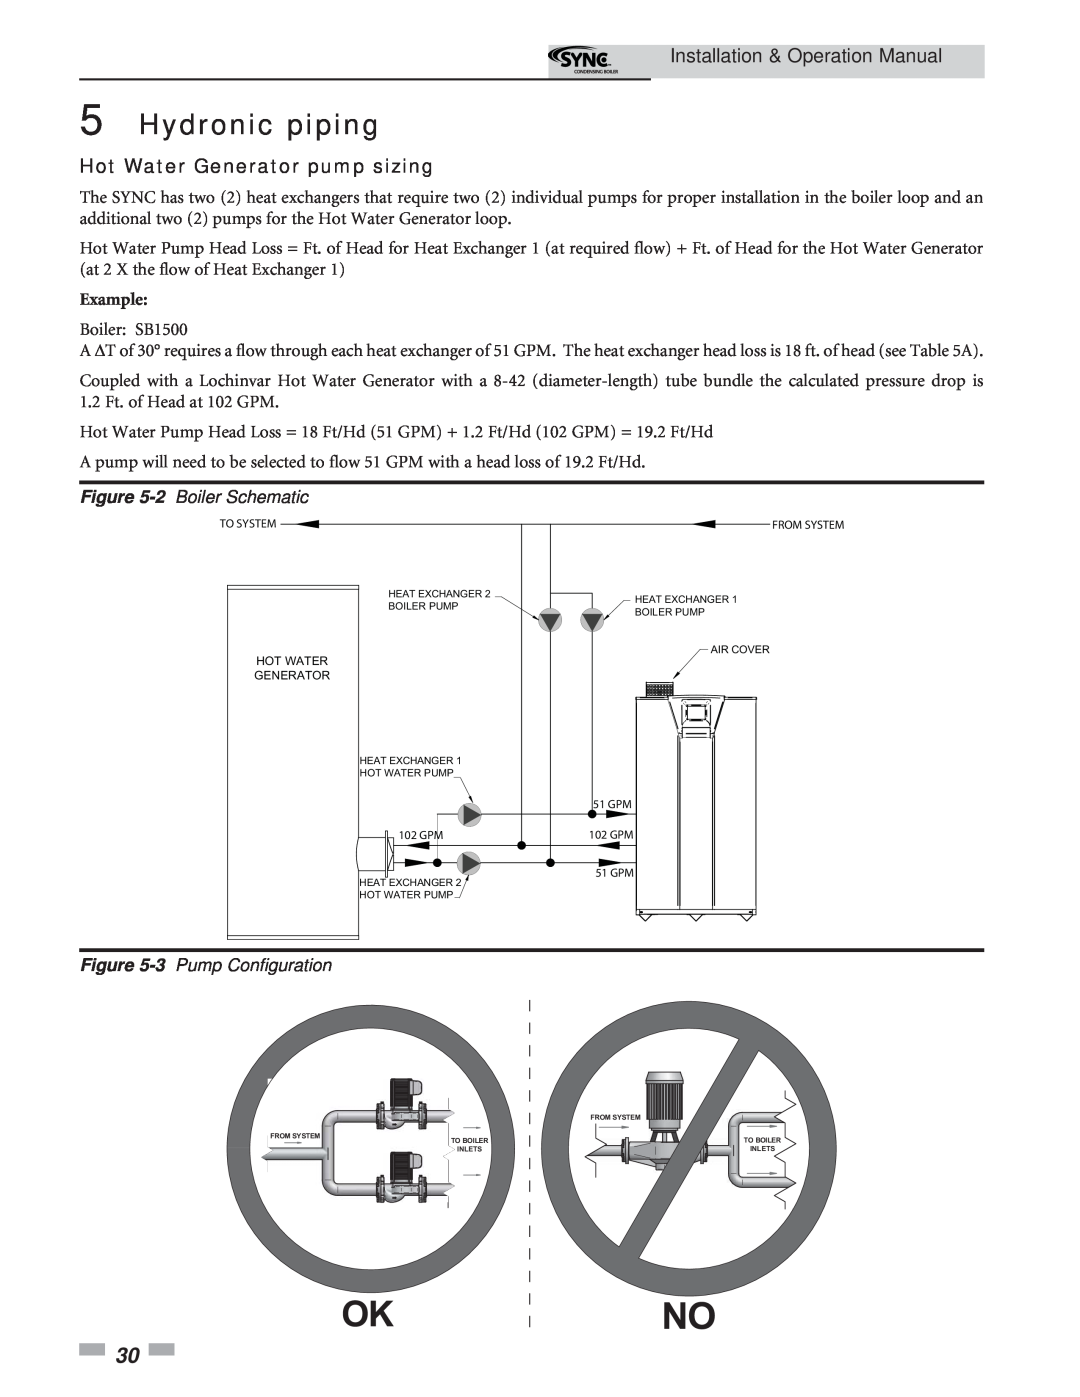 Lochinvar 5 Hot Water Generator pump sizing, 2 Boiler Schematic, 3 Pump Configuration, Okno, Hydronic piping 